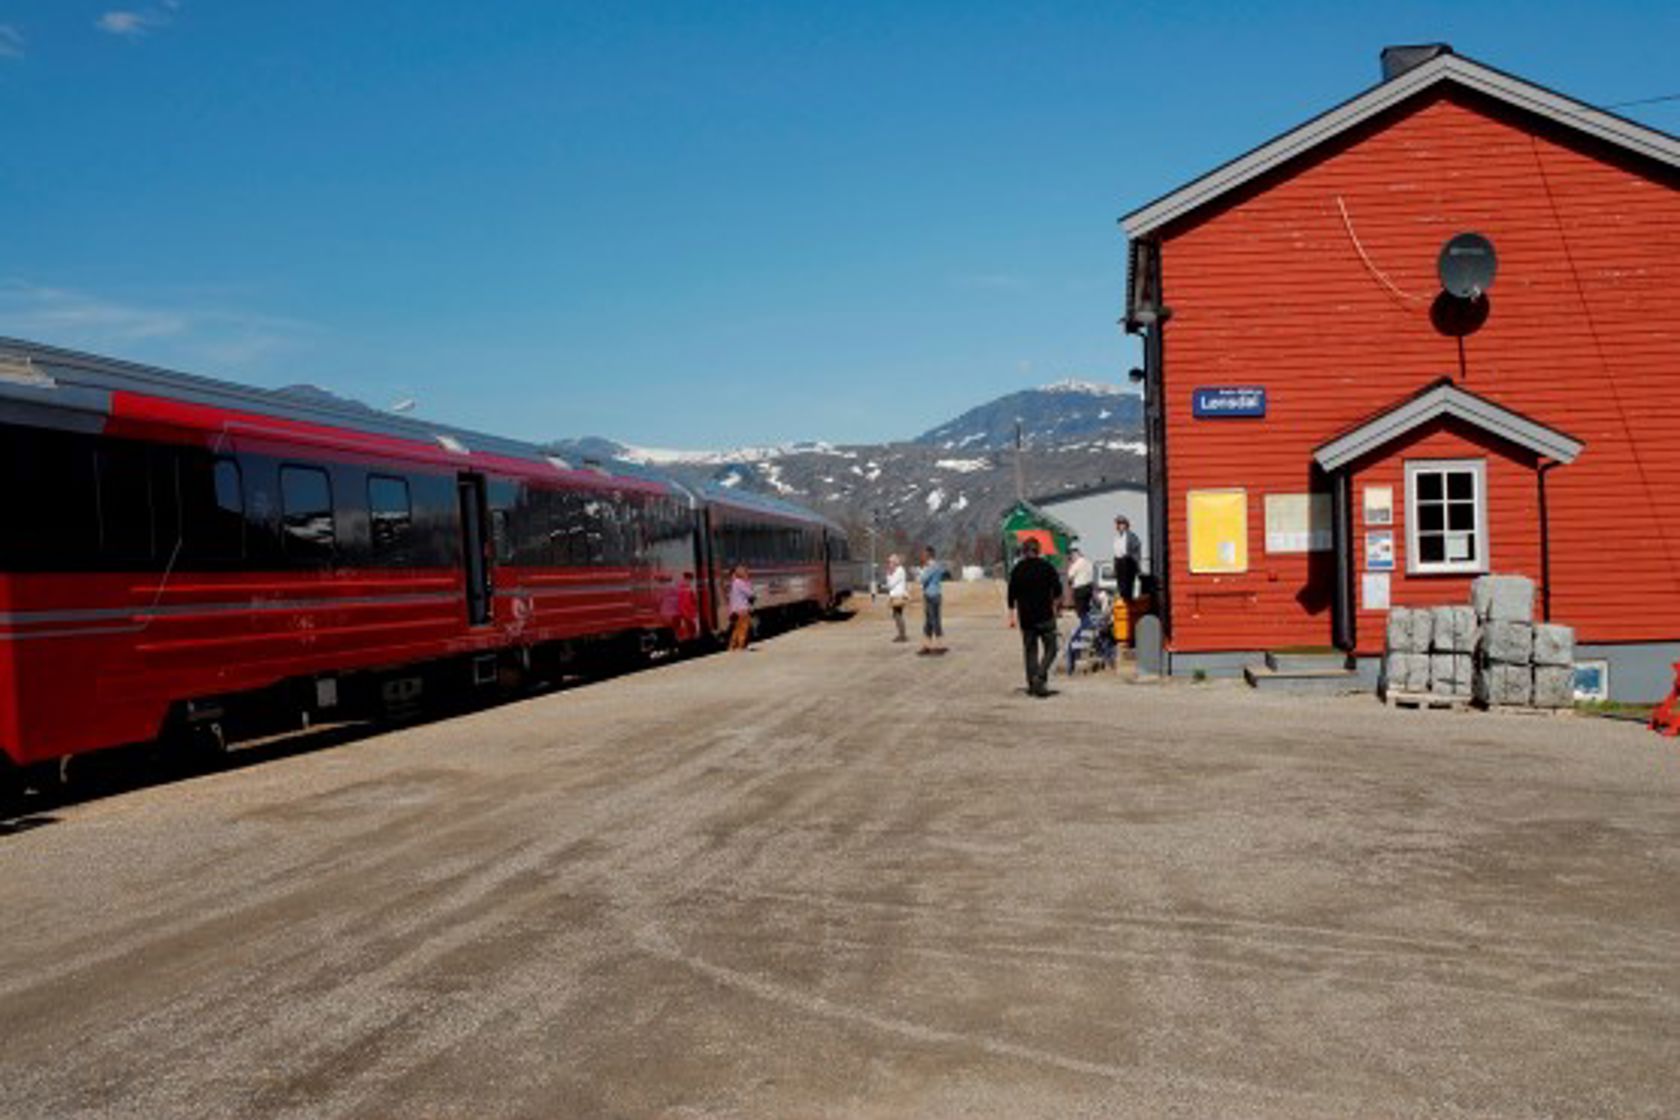 Exterior view of Lønsdal station